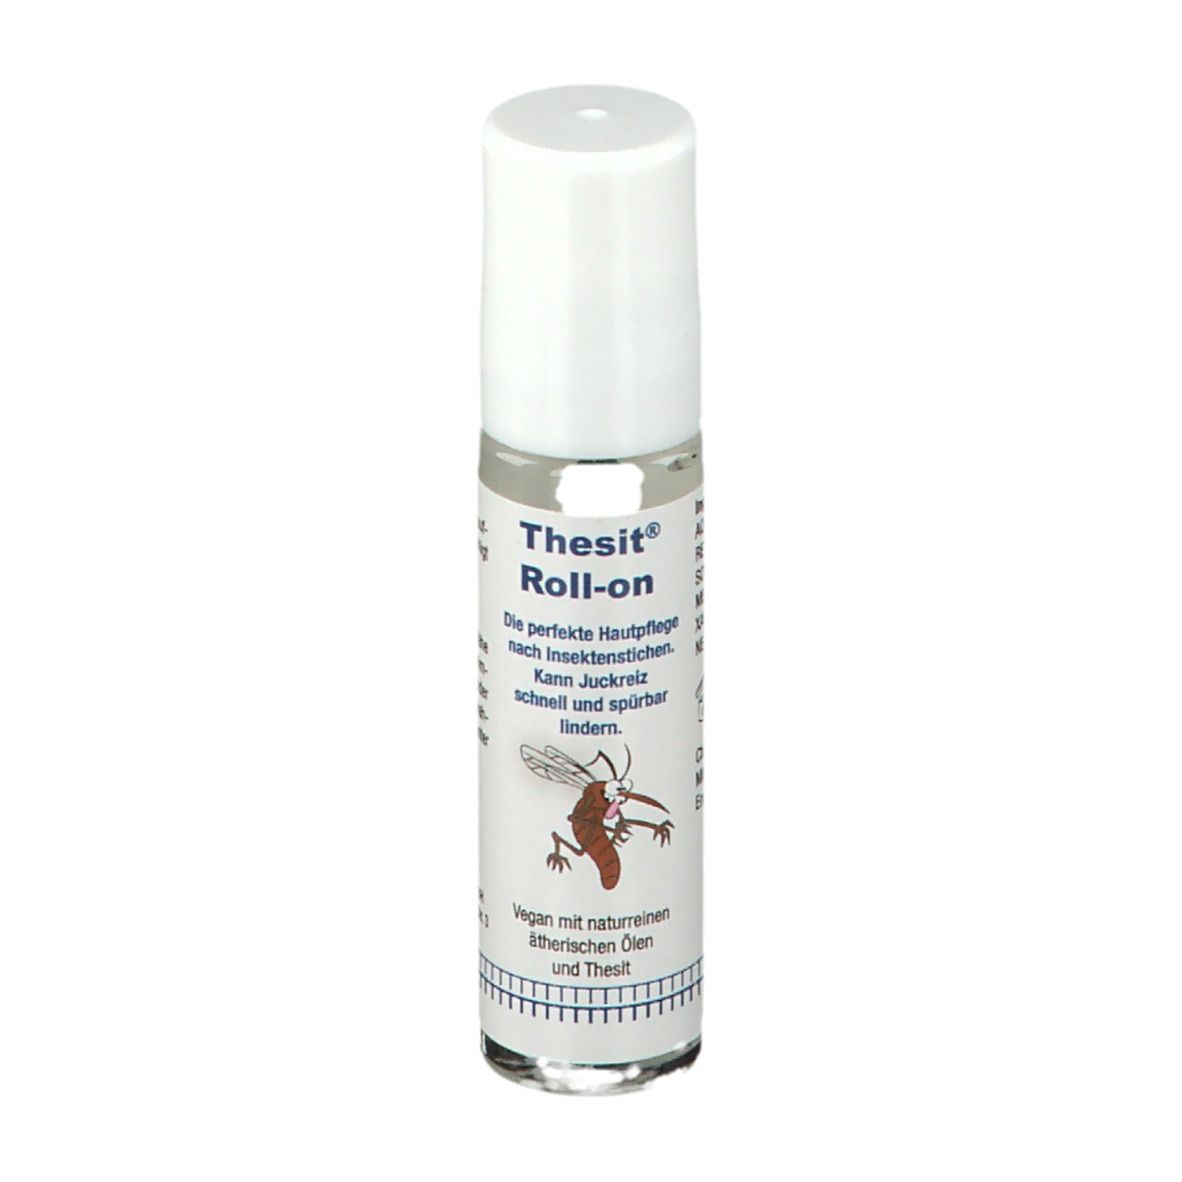 Image of Thesit® Roll-on